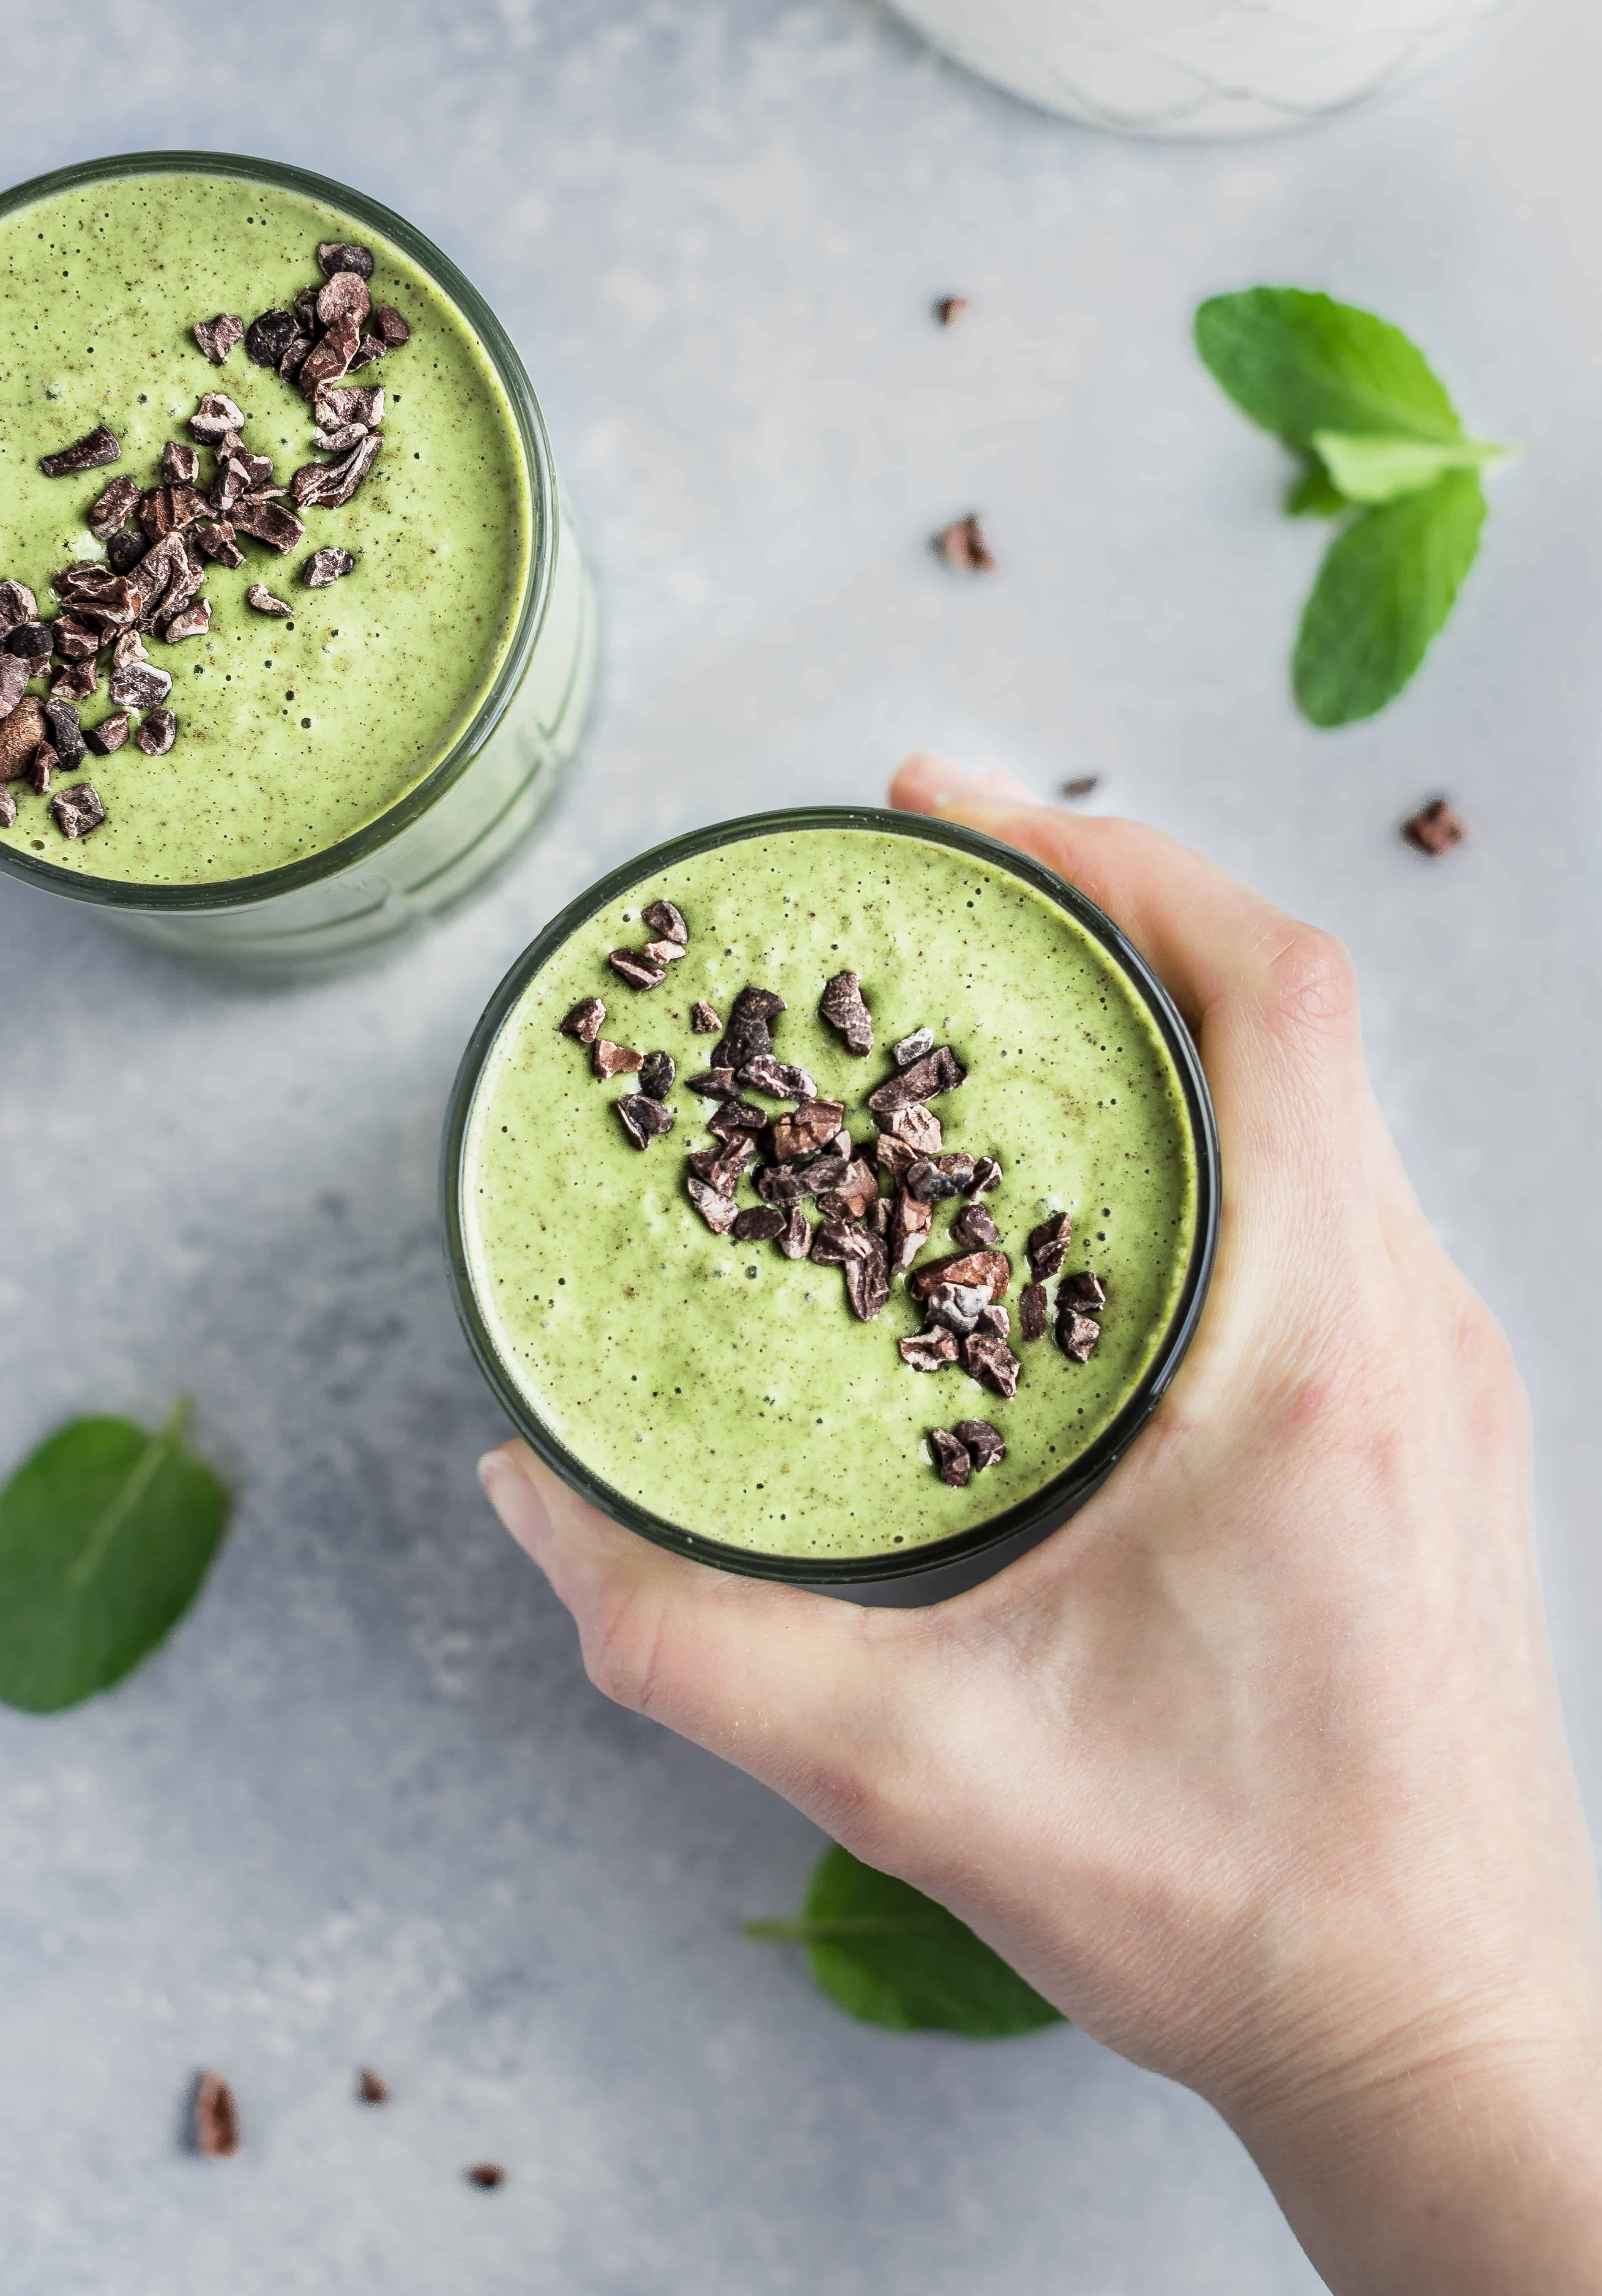 A healthy Mint Chocolate Chip Smoothie